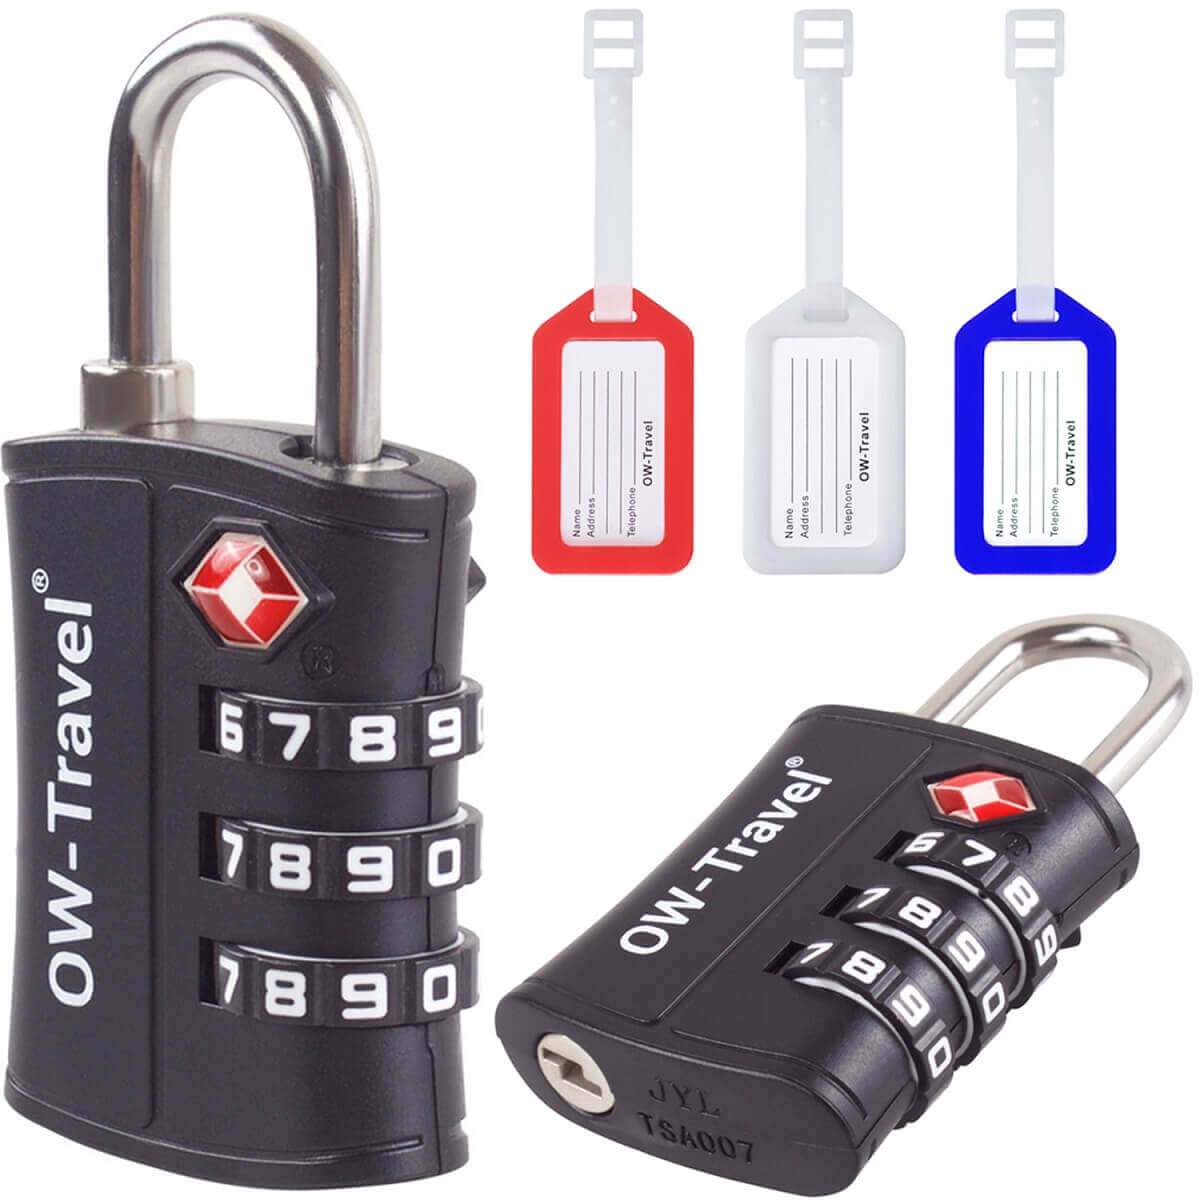 ✅ 3 Dial TSA Combination Padlock + Luggage Tags - Travel Sentry Approved Heavy Duty Number Lock for Suitcases, Luggage, Gym Lockers and Tool Boxes - One-Wear